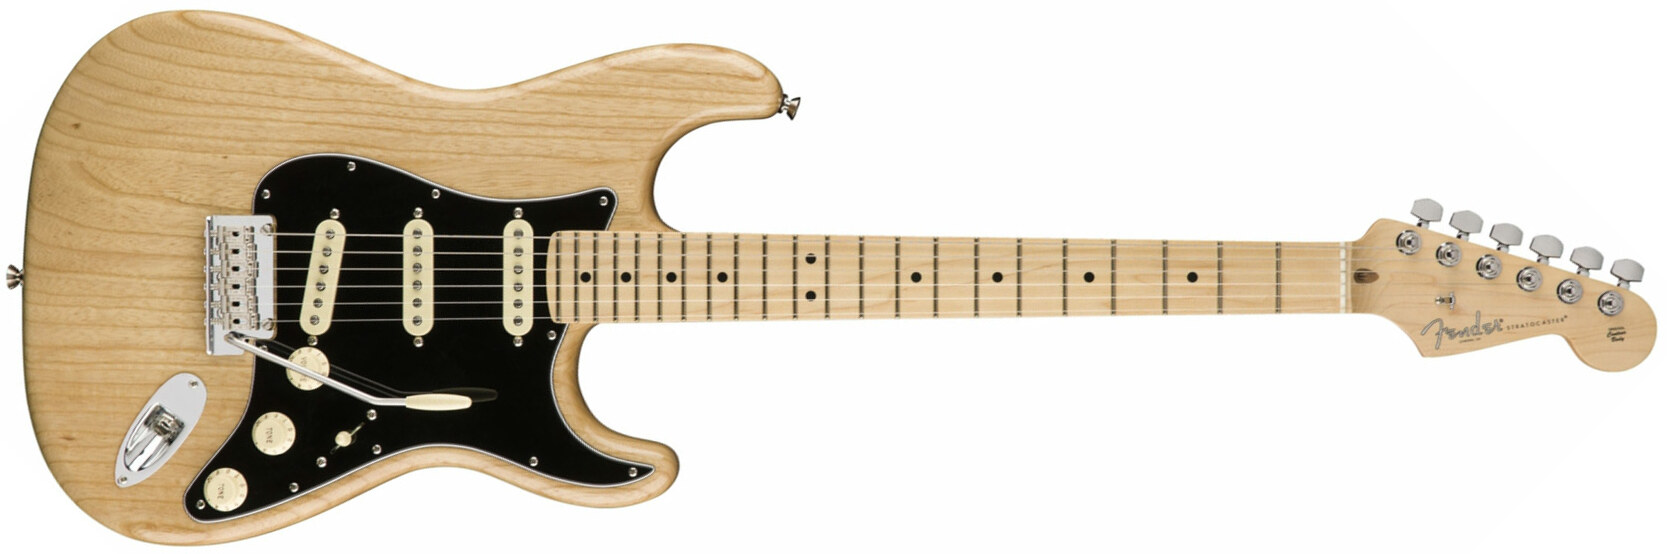 Fender Strat American Professional 3s Usa Mn - Natural - Str shape electric guitar - Main picture